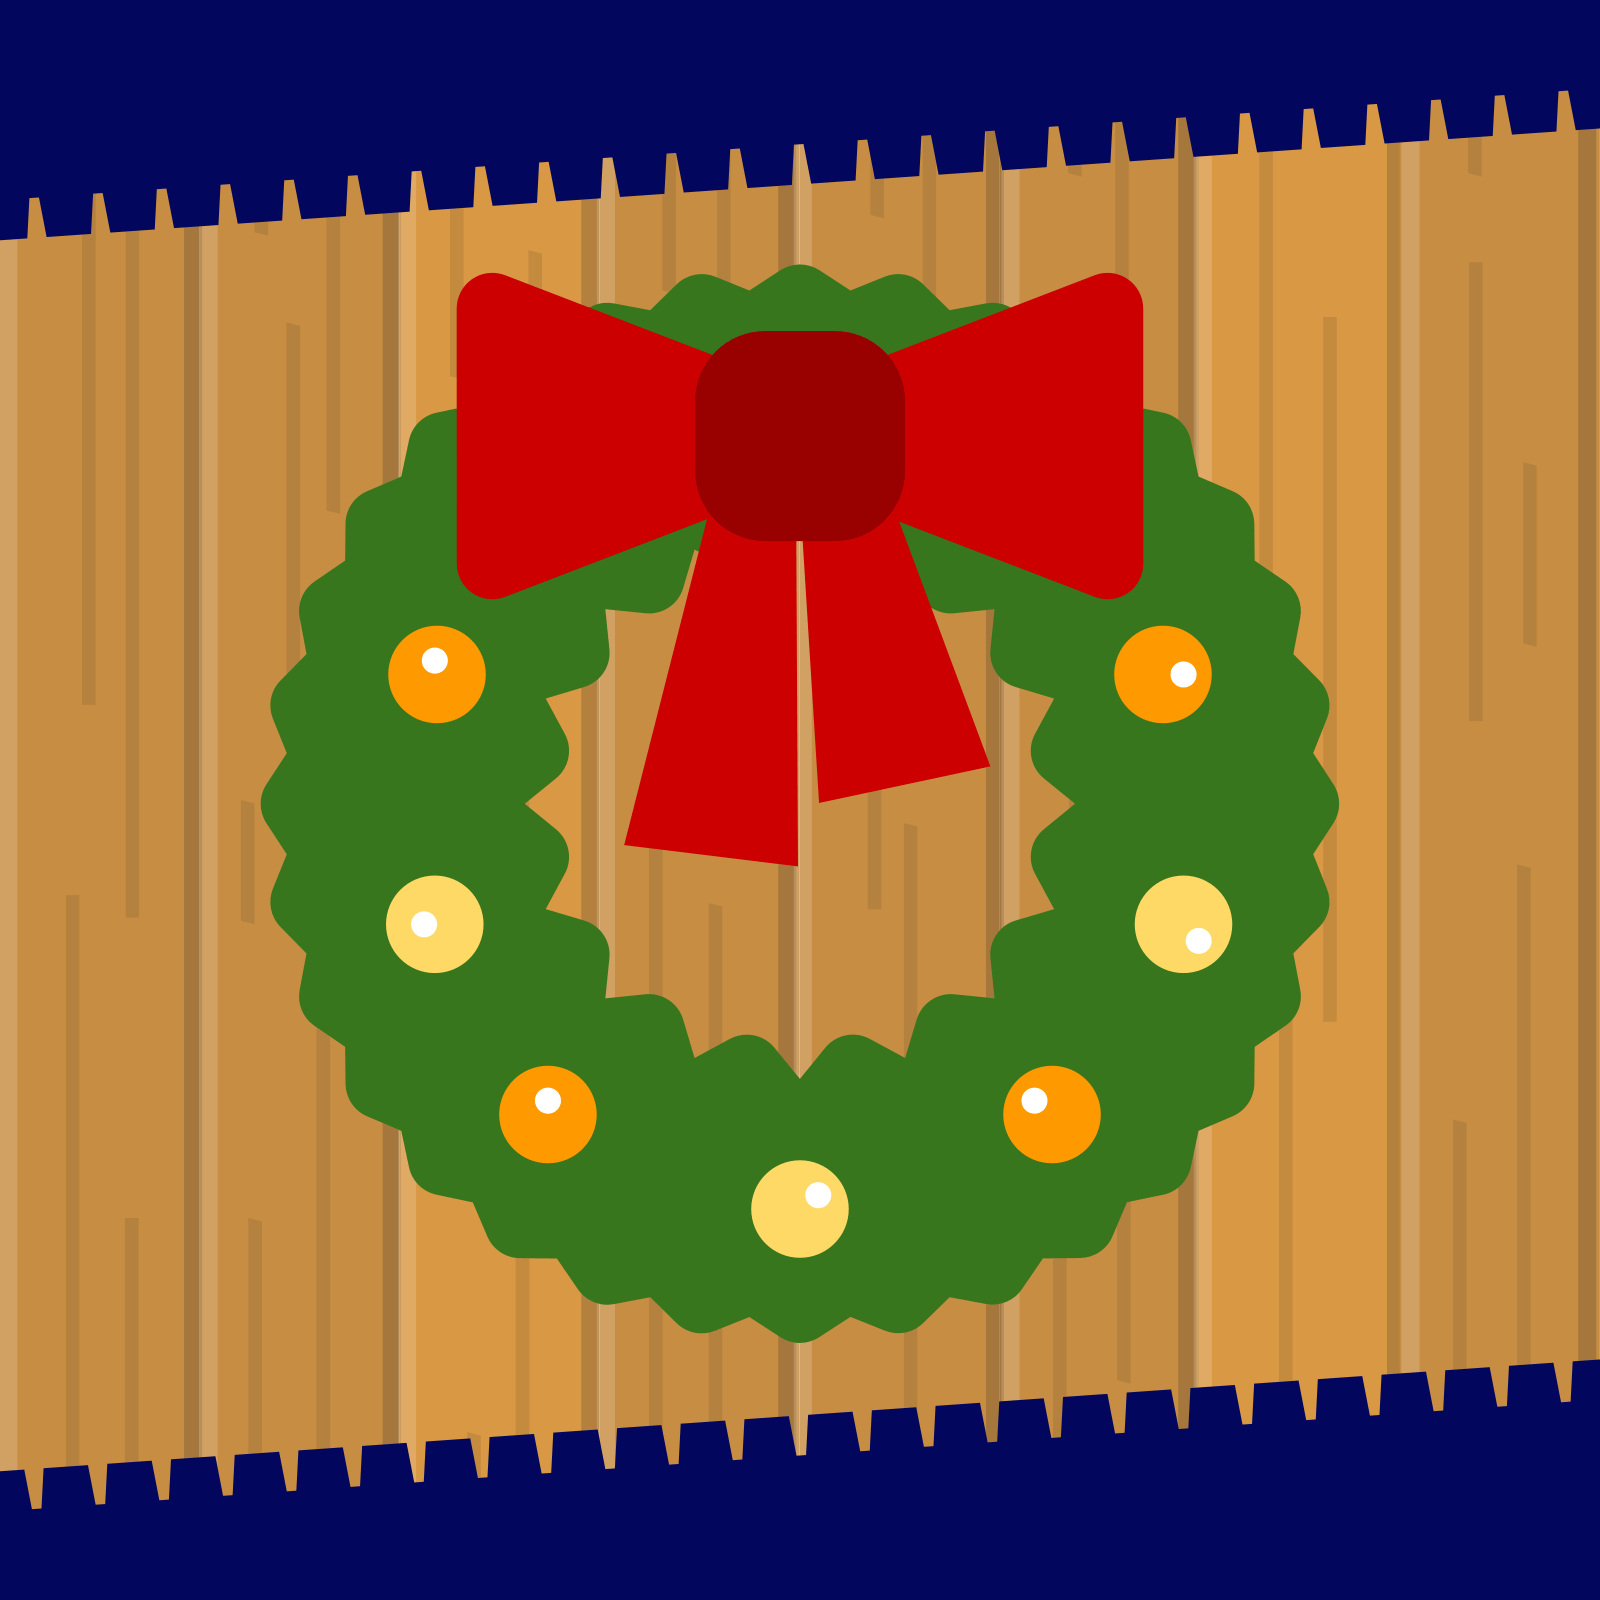 Drawing of a green wreath with red bow